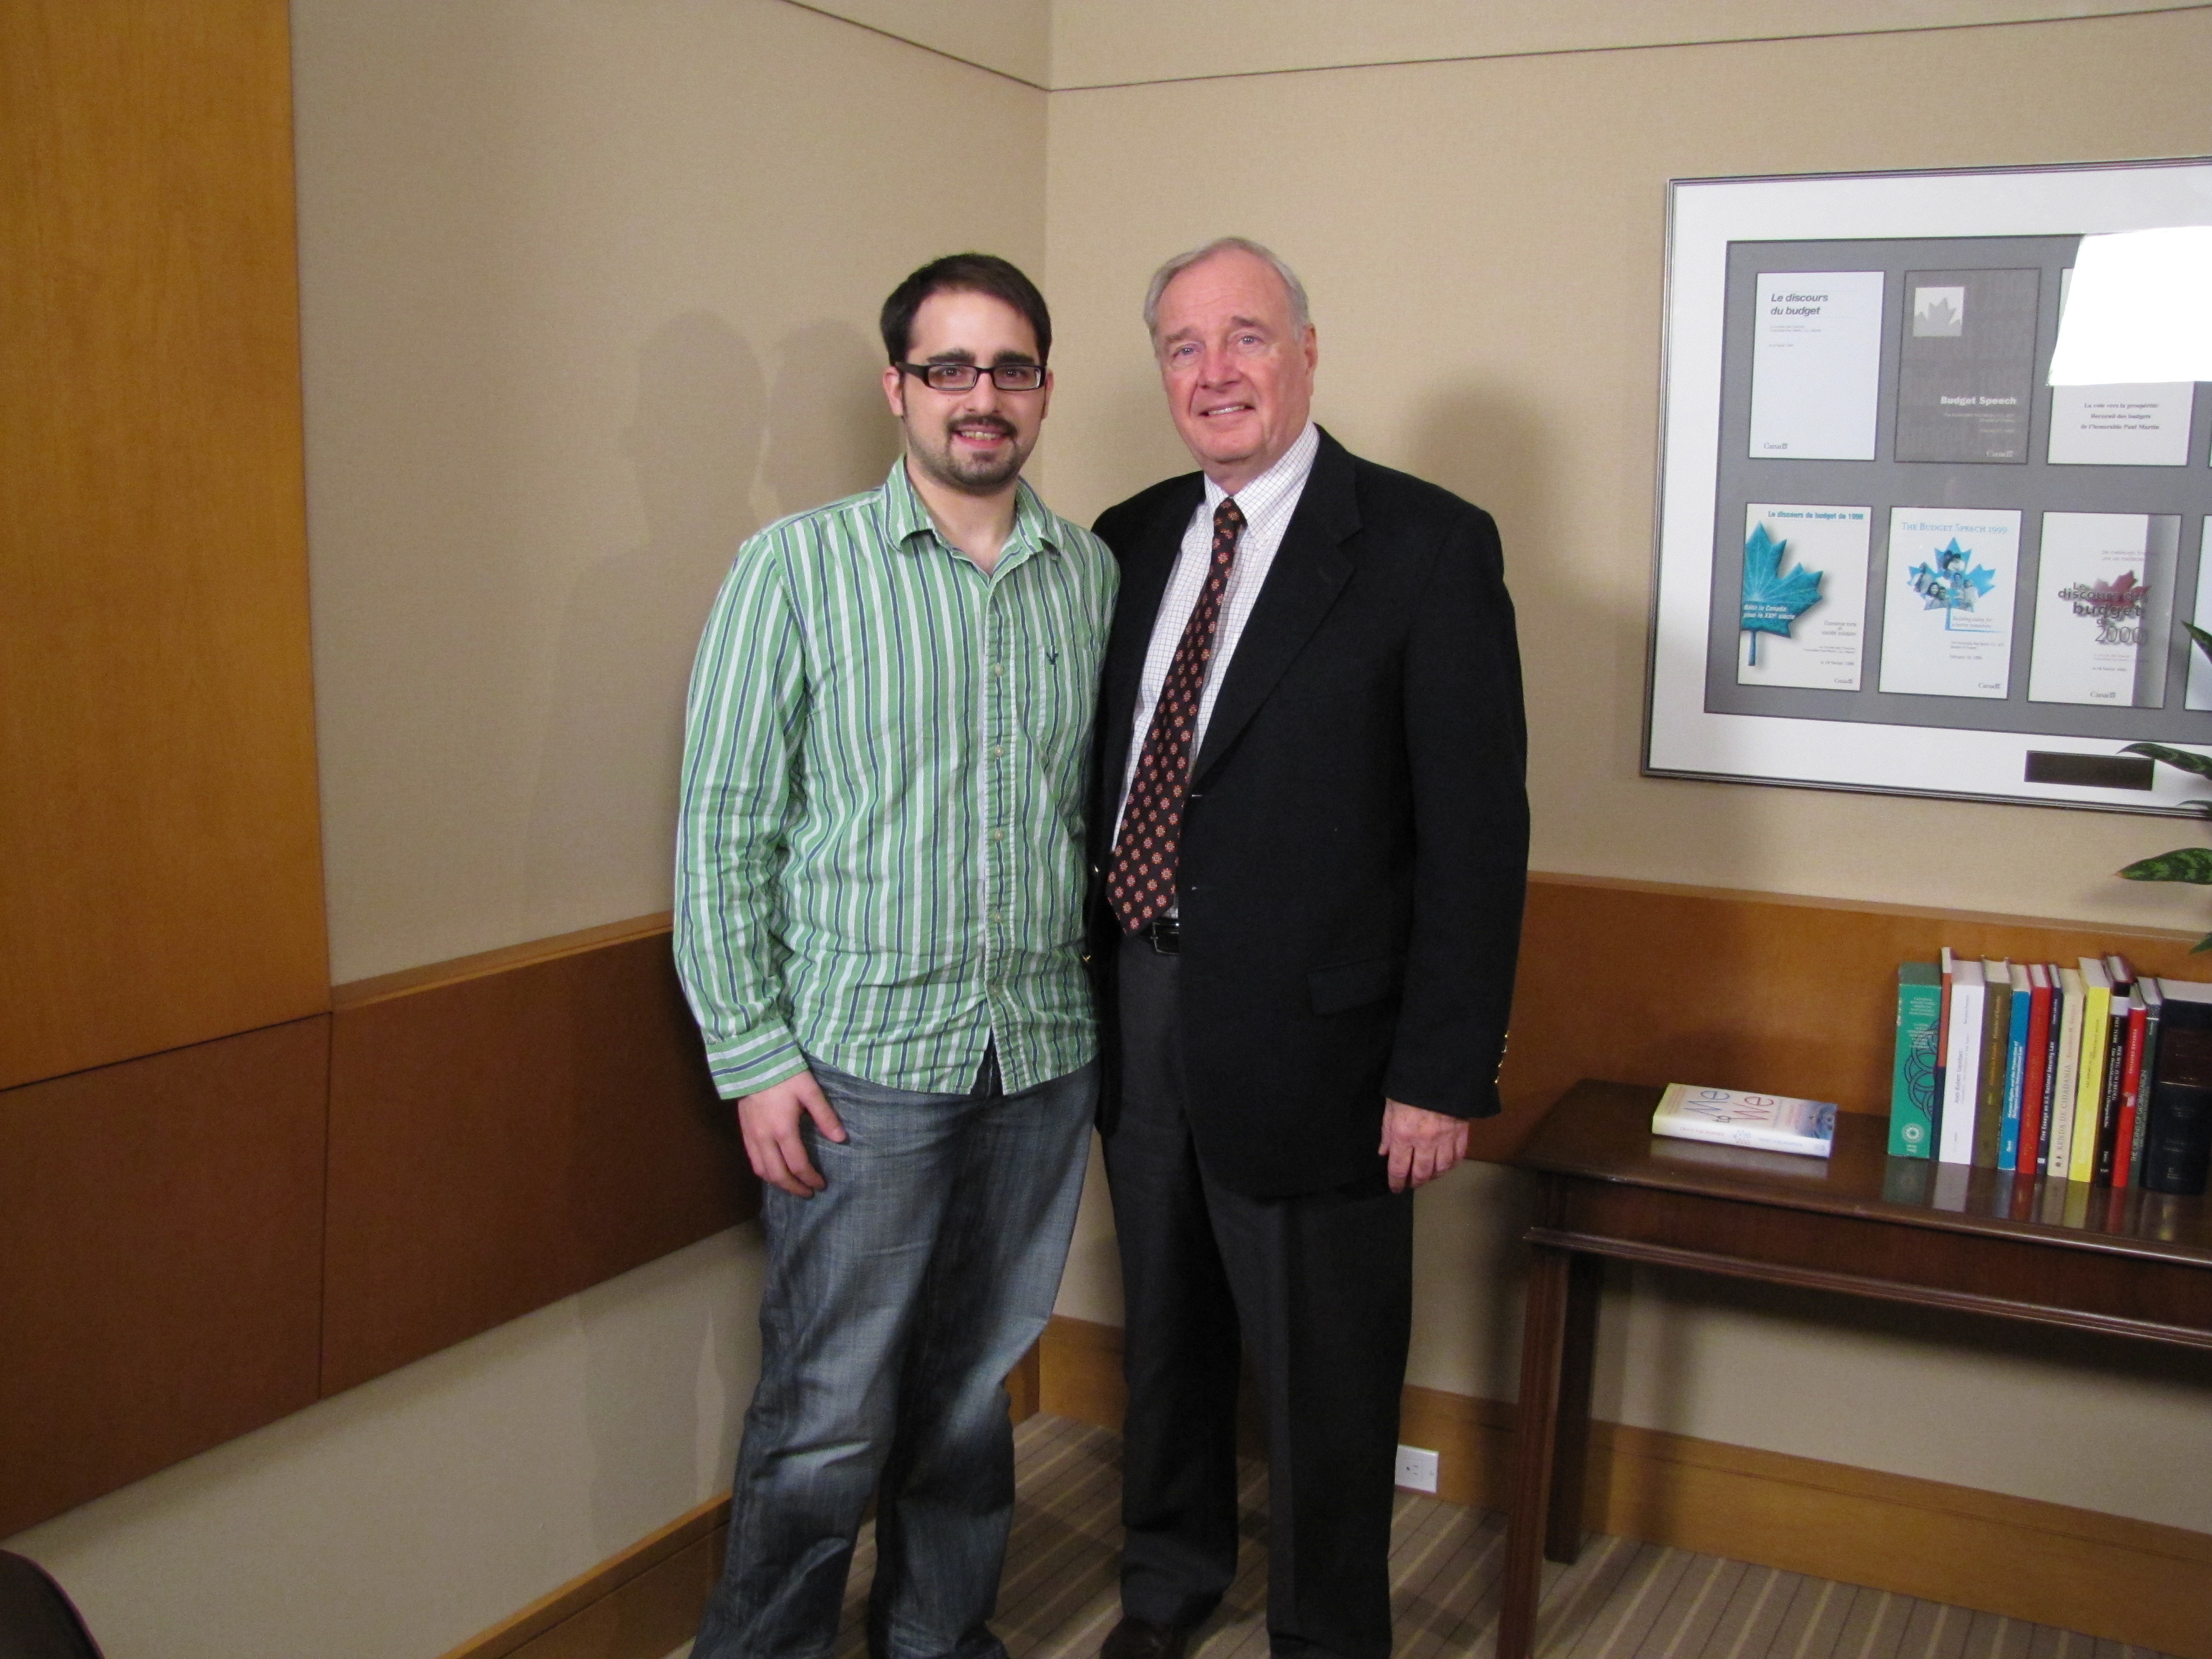 Joshua Jamieson with former Prime Minister Rt. Hon. Paul Martin following an interview for Just Himself: the story of Don Jamieson in Montreal, PQ